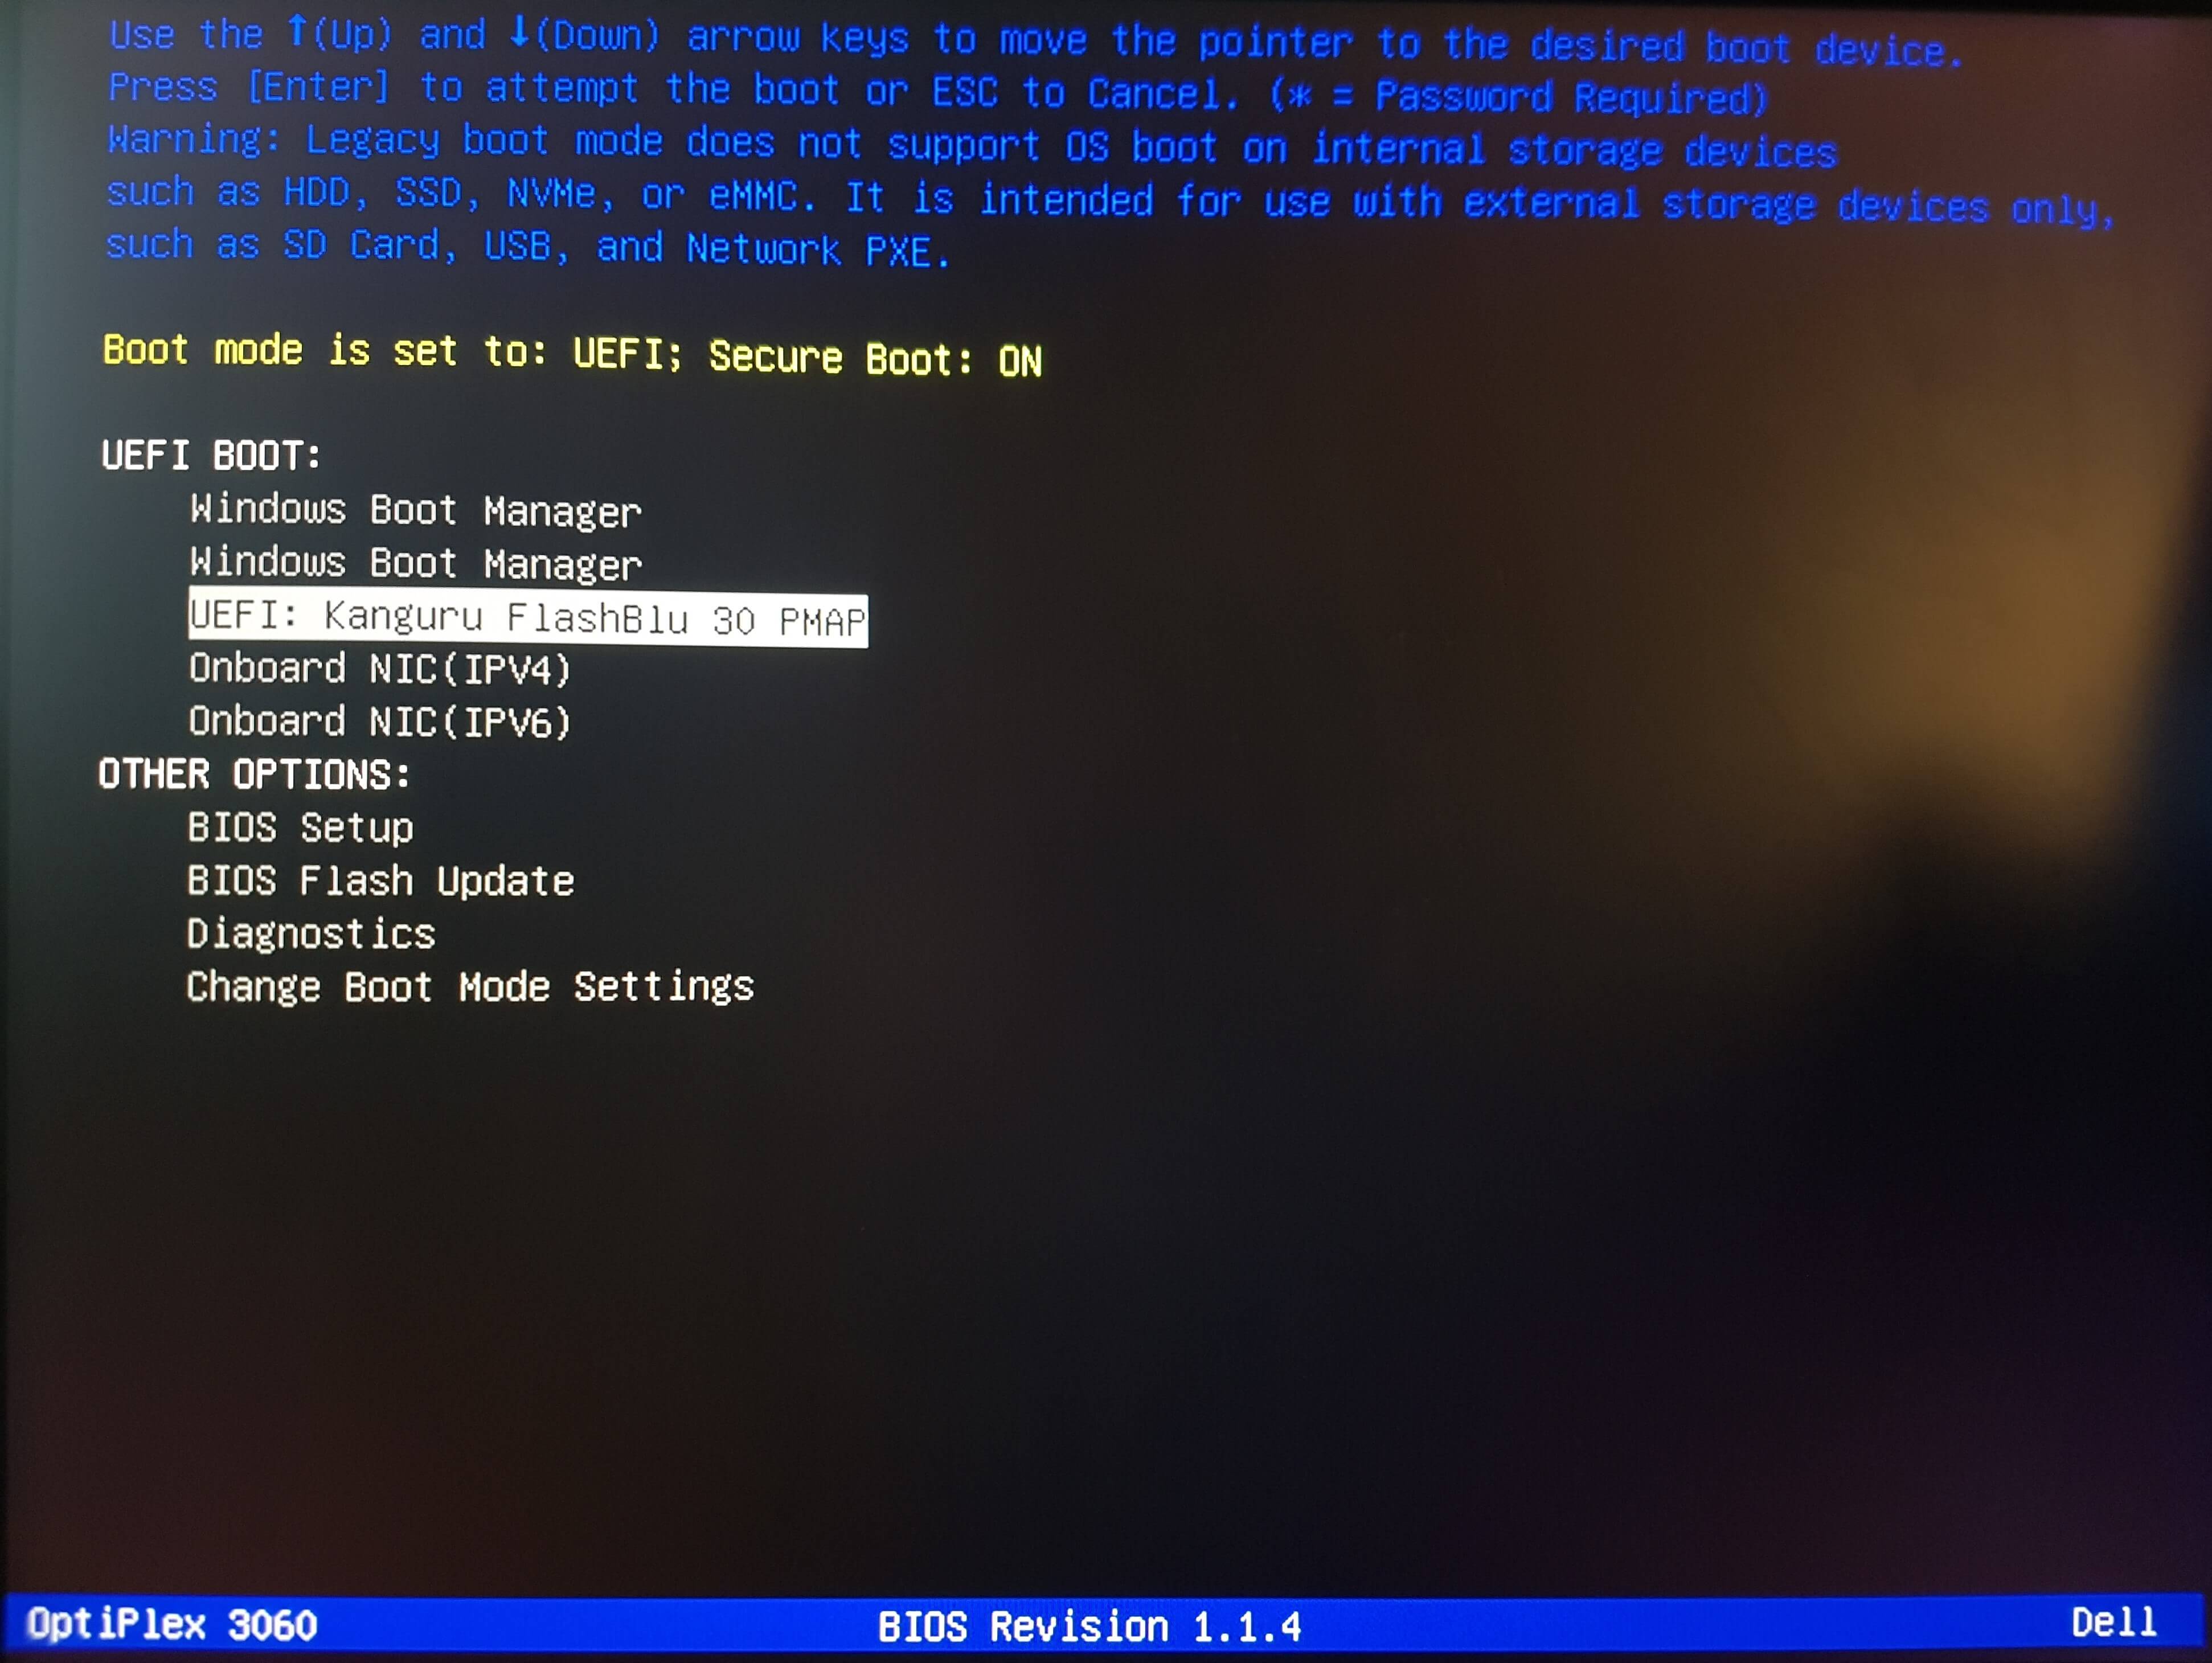 Boot menu shown when resetting the software image on an appliance using a bootable USB.